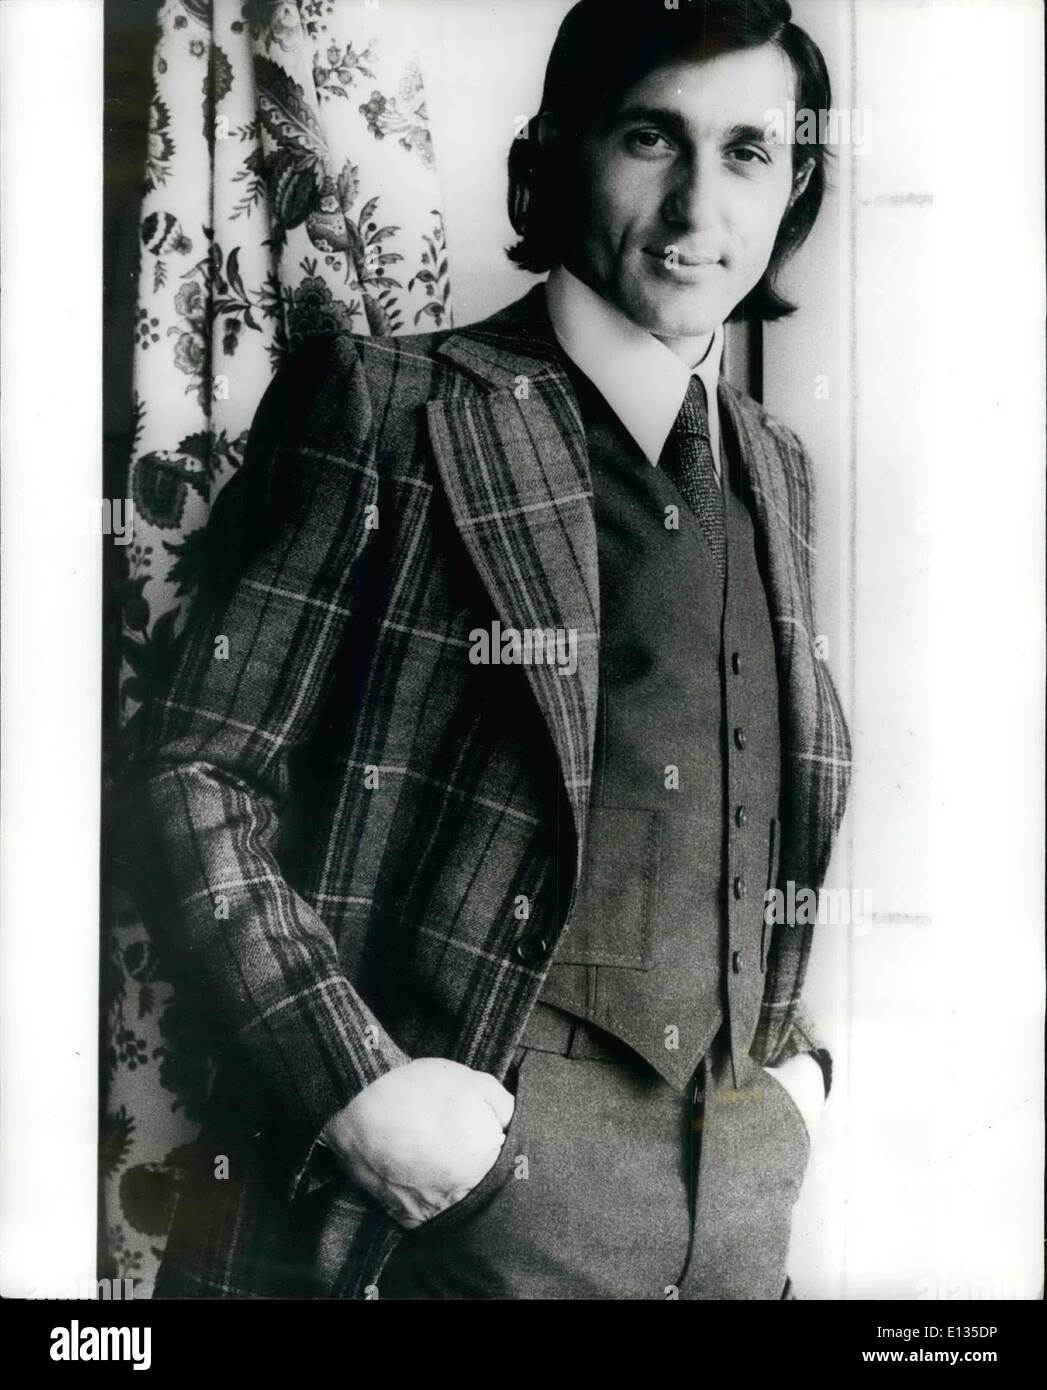 Feb. 28, 2012 - Nasty - The Model: Ilie Nastase, The Rumanian tennis star who is noted for showing off on the tennis court, is seen here showing off the fashions of the famous French tailor Guy Laroche, for the fourthcoming Autumn/Winter. Ilie is seen here wearing a three-place flannel suit, the jacket Scottish style in yellow, green and orange design on plain grey, with the hand-sewn trousers and waistcoat in becoming pastel grey. Stock Photo